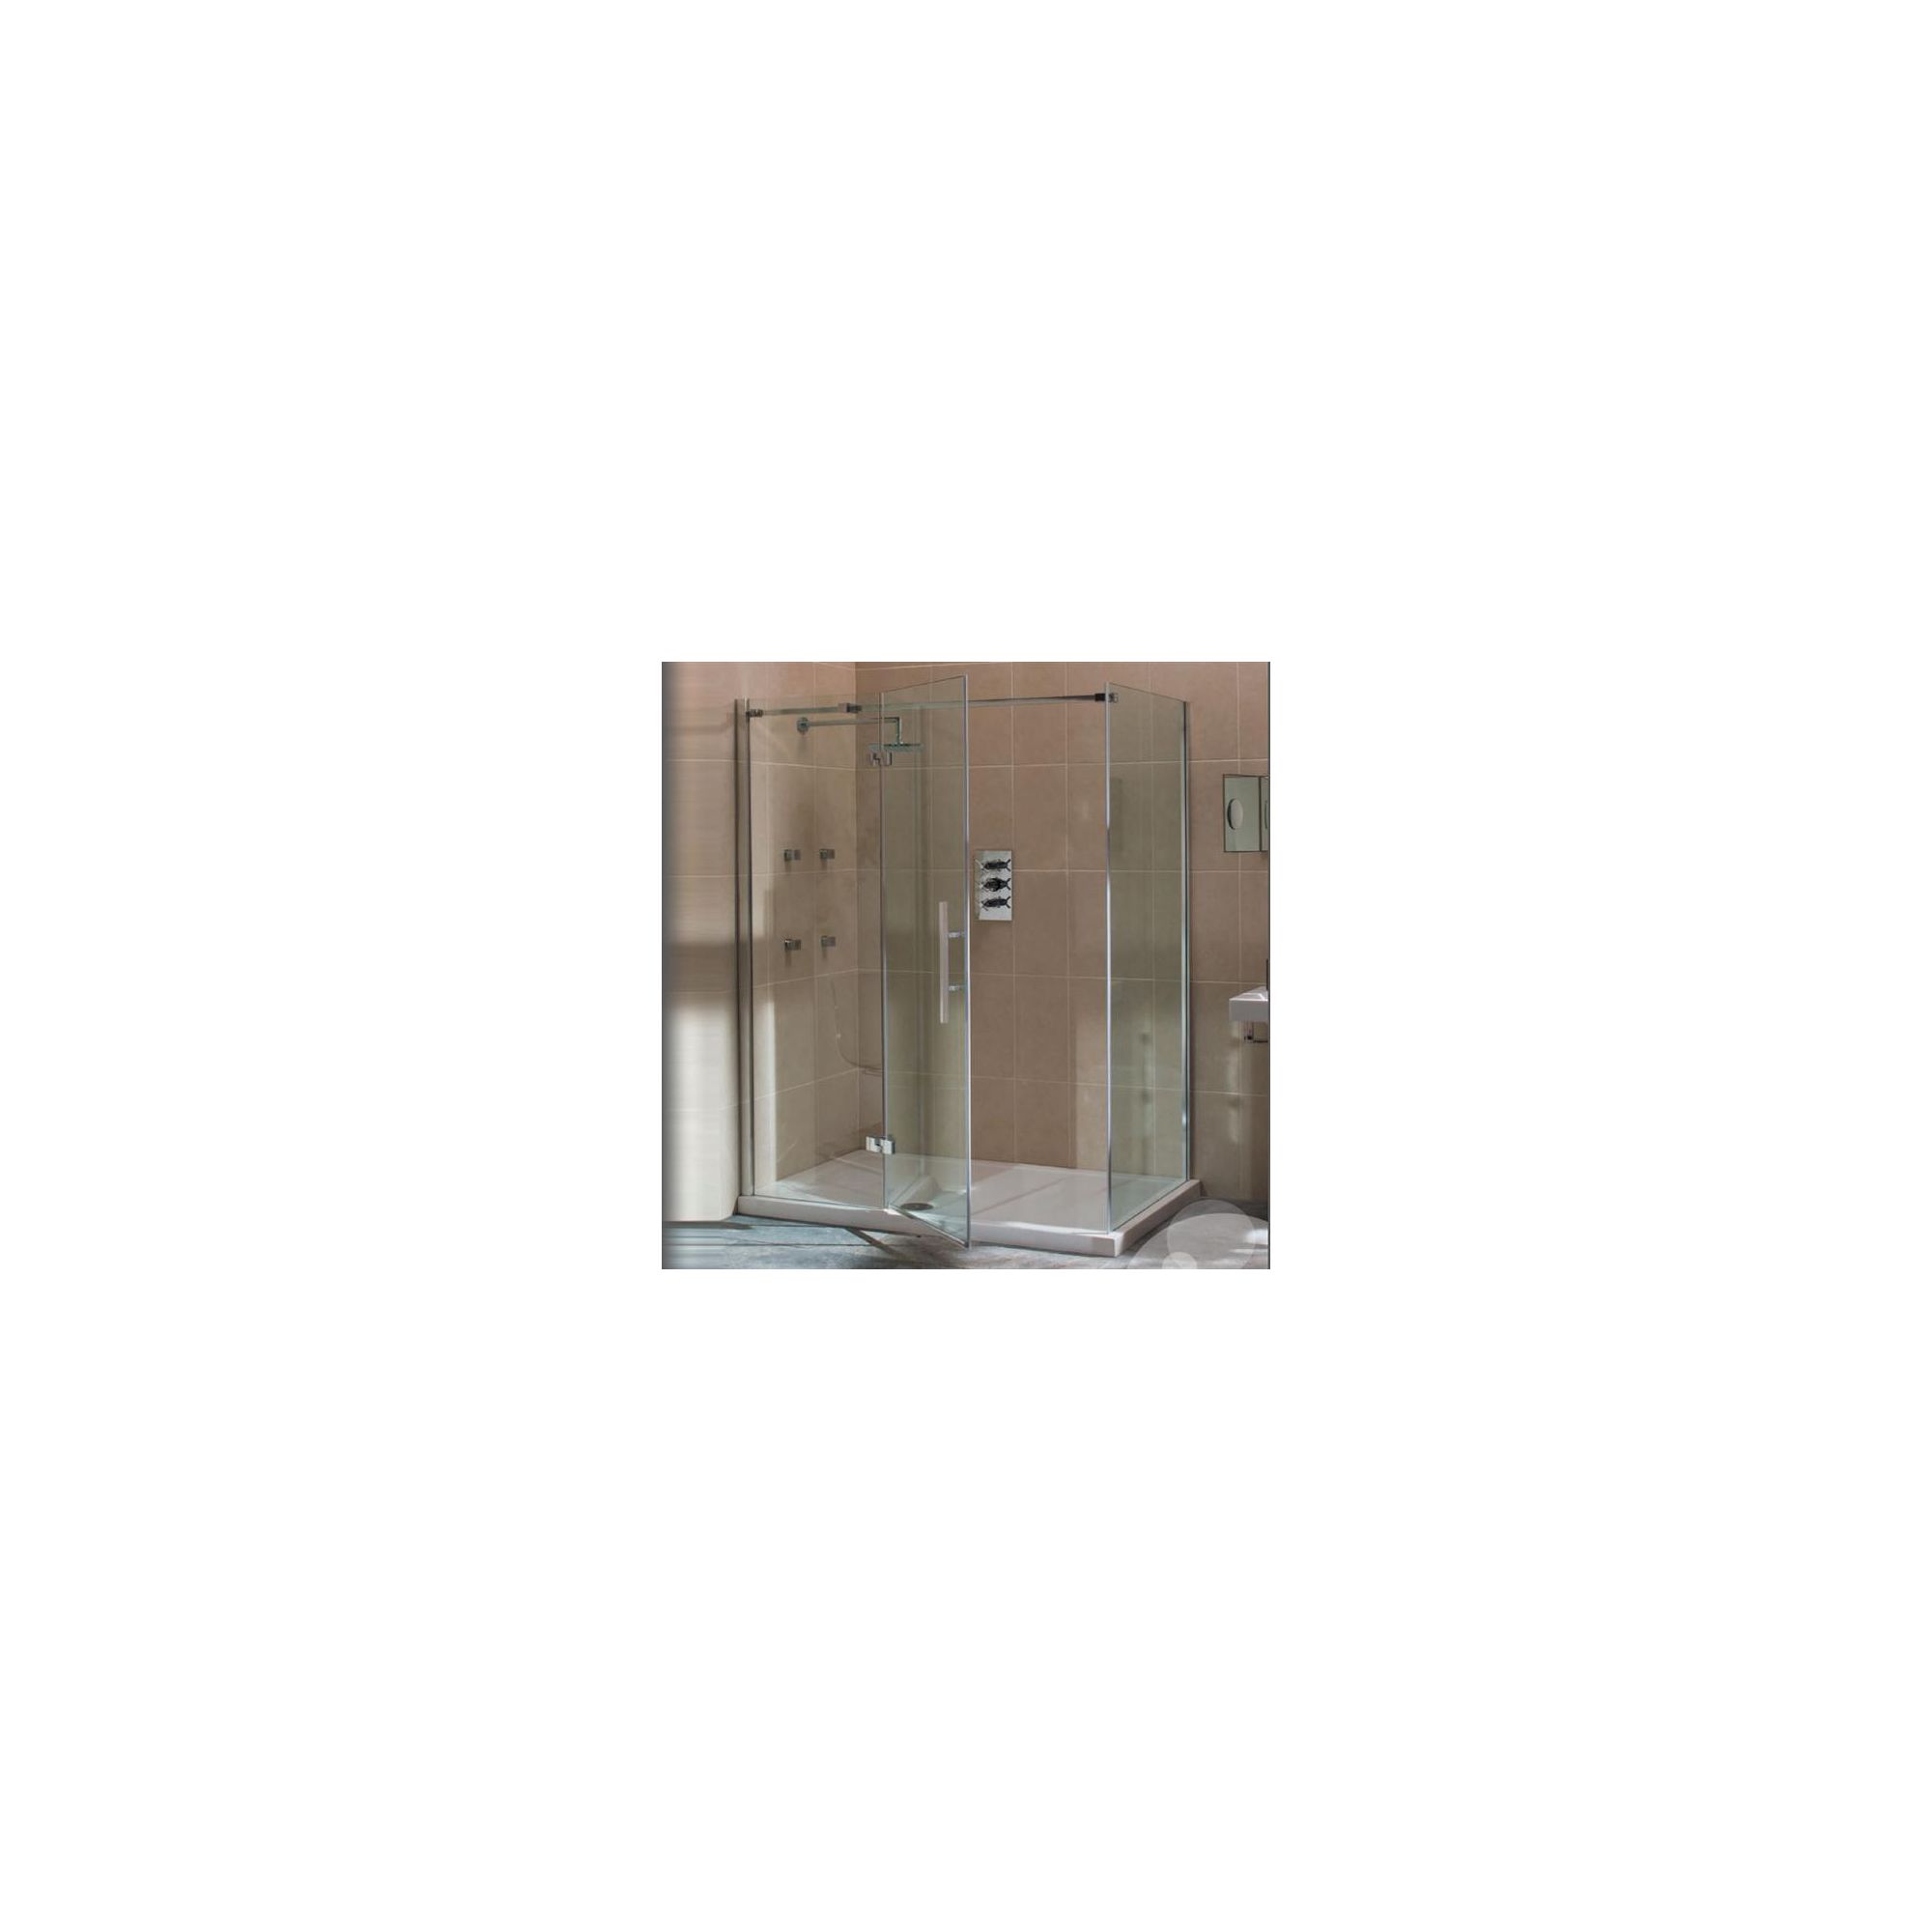 Merlyn Vivid Nine Hinged Door Shower Enclosure with Inline Panel, 1400mm x 900mm, Left Handed, Low Profile Tray, 8mm Glass at Tescos Direct